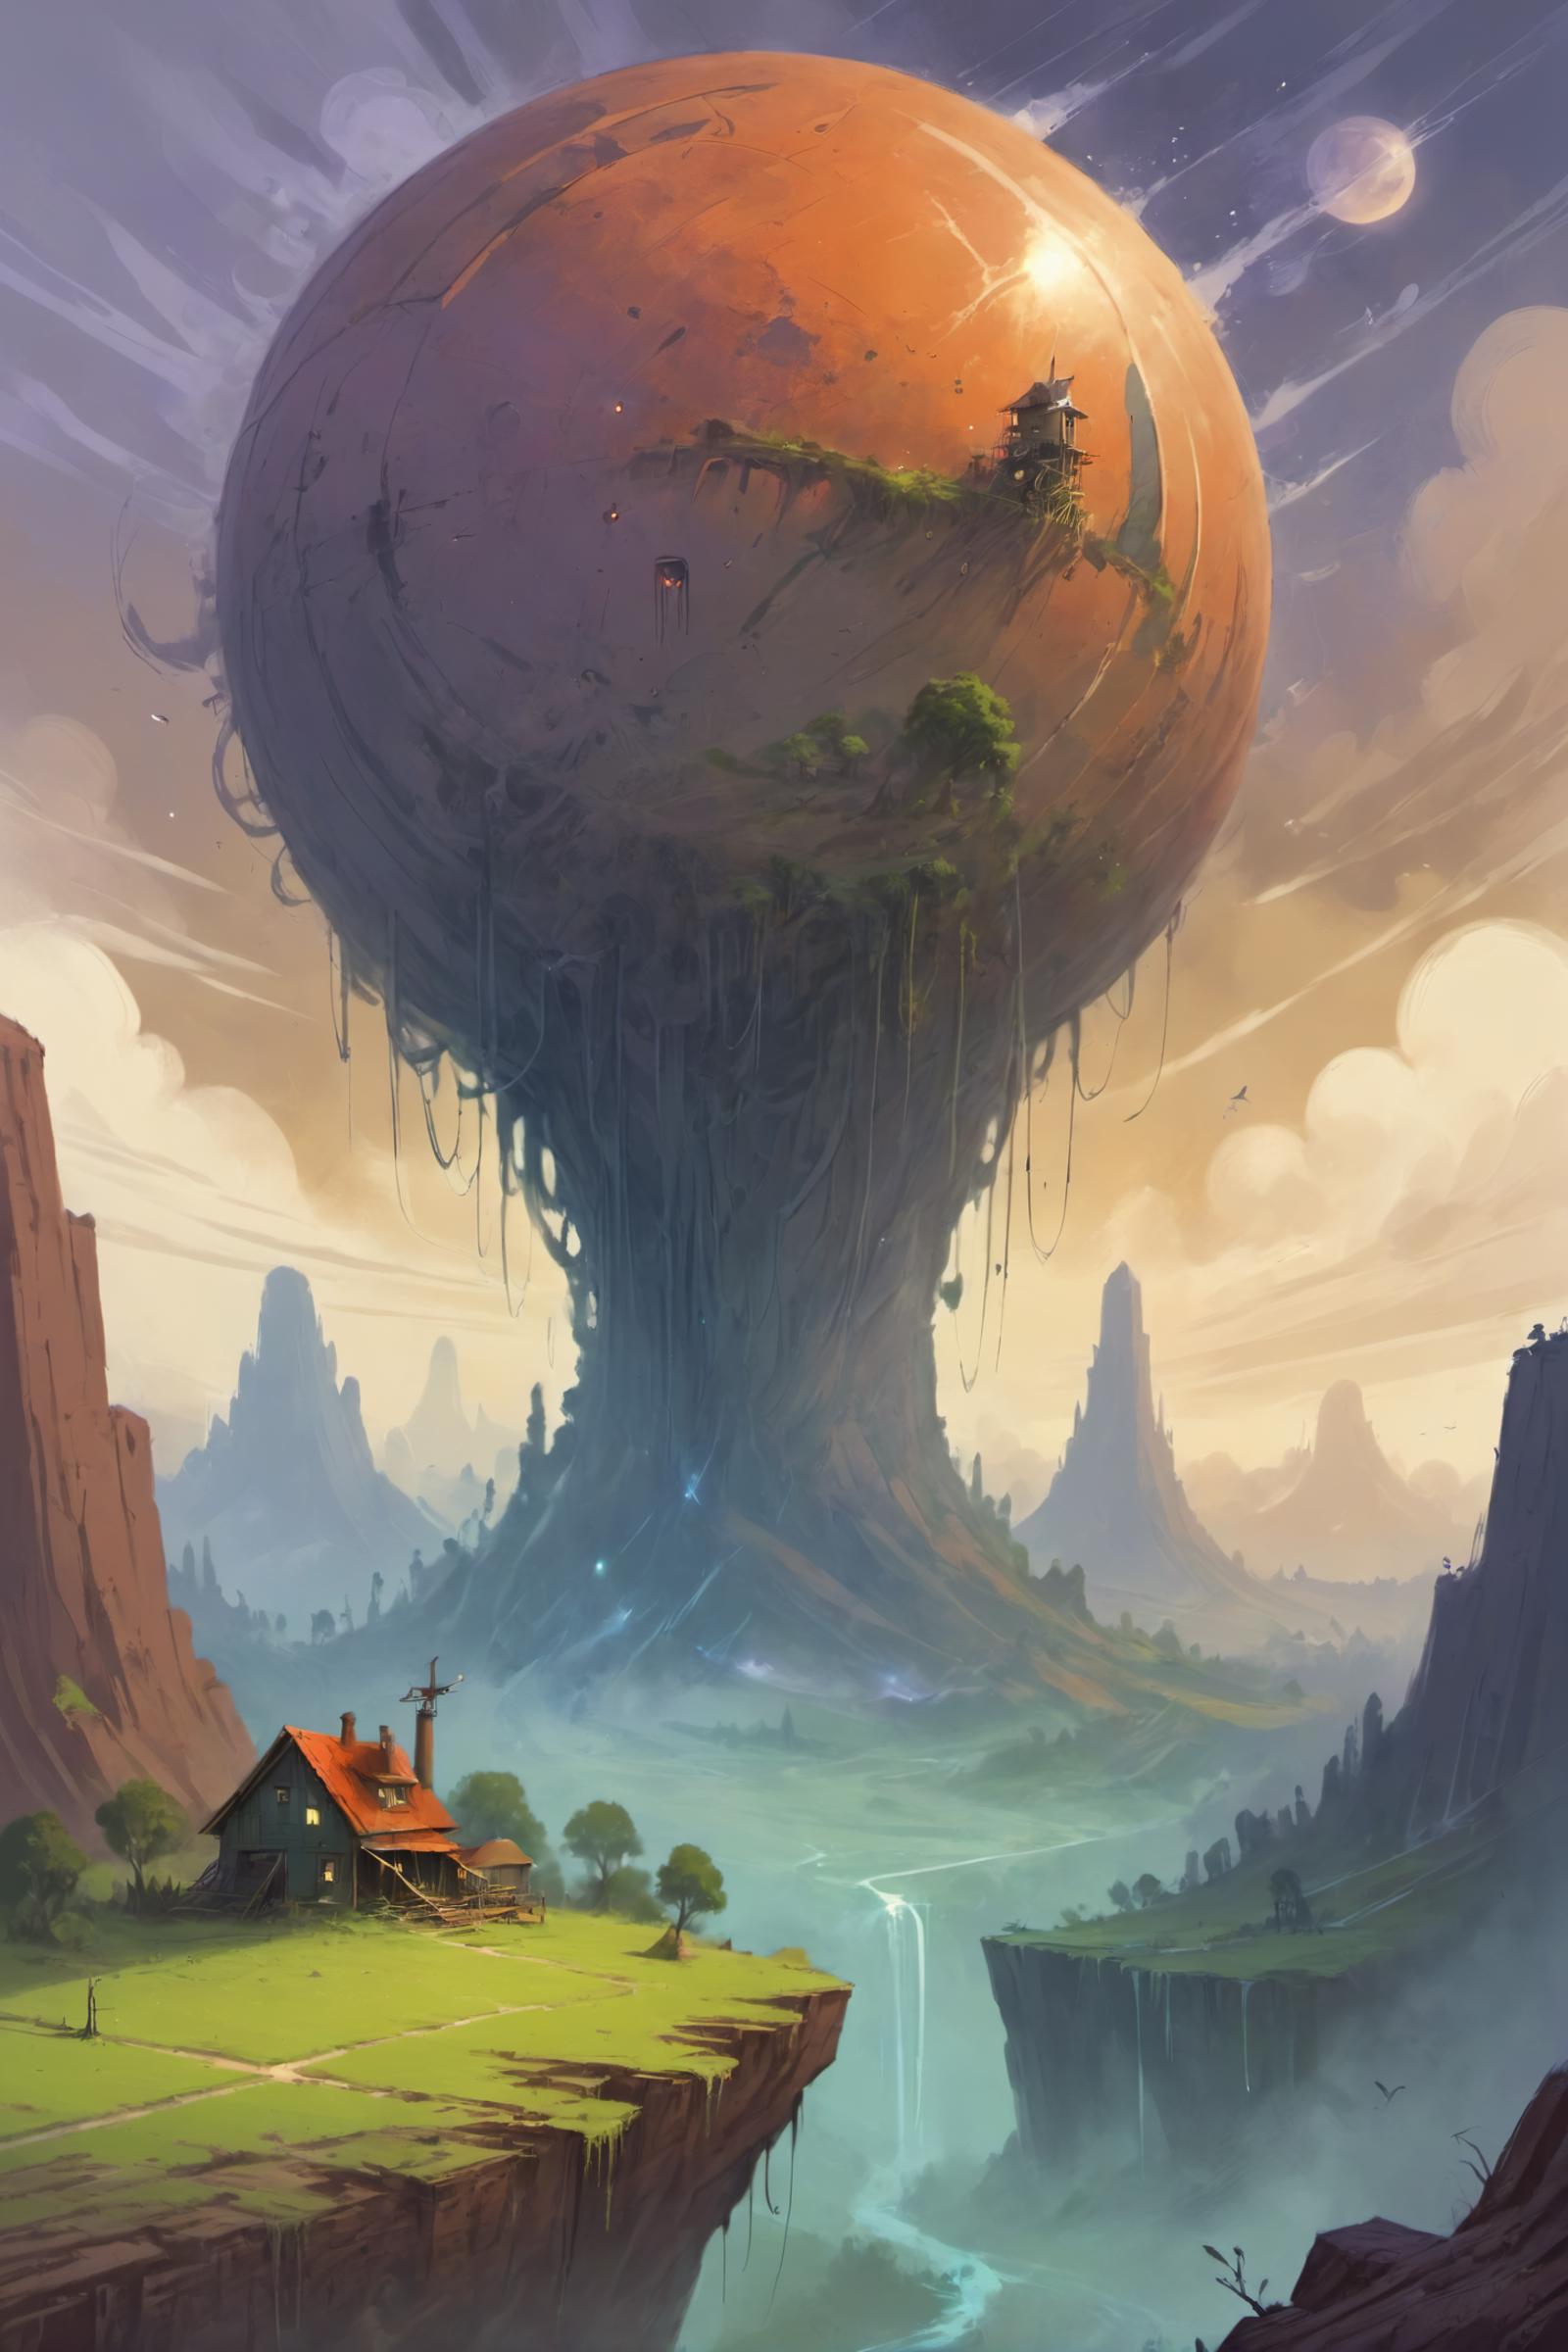 Artistic Illustration of a Giant Tree in Front of a House and Mountains